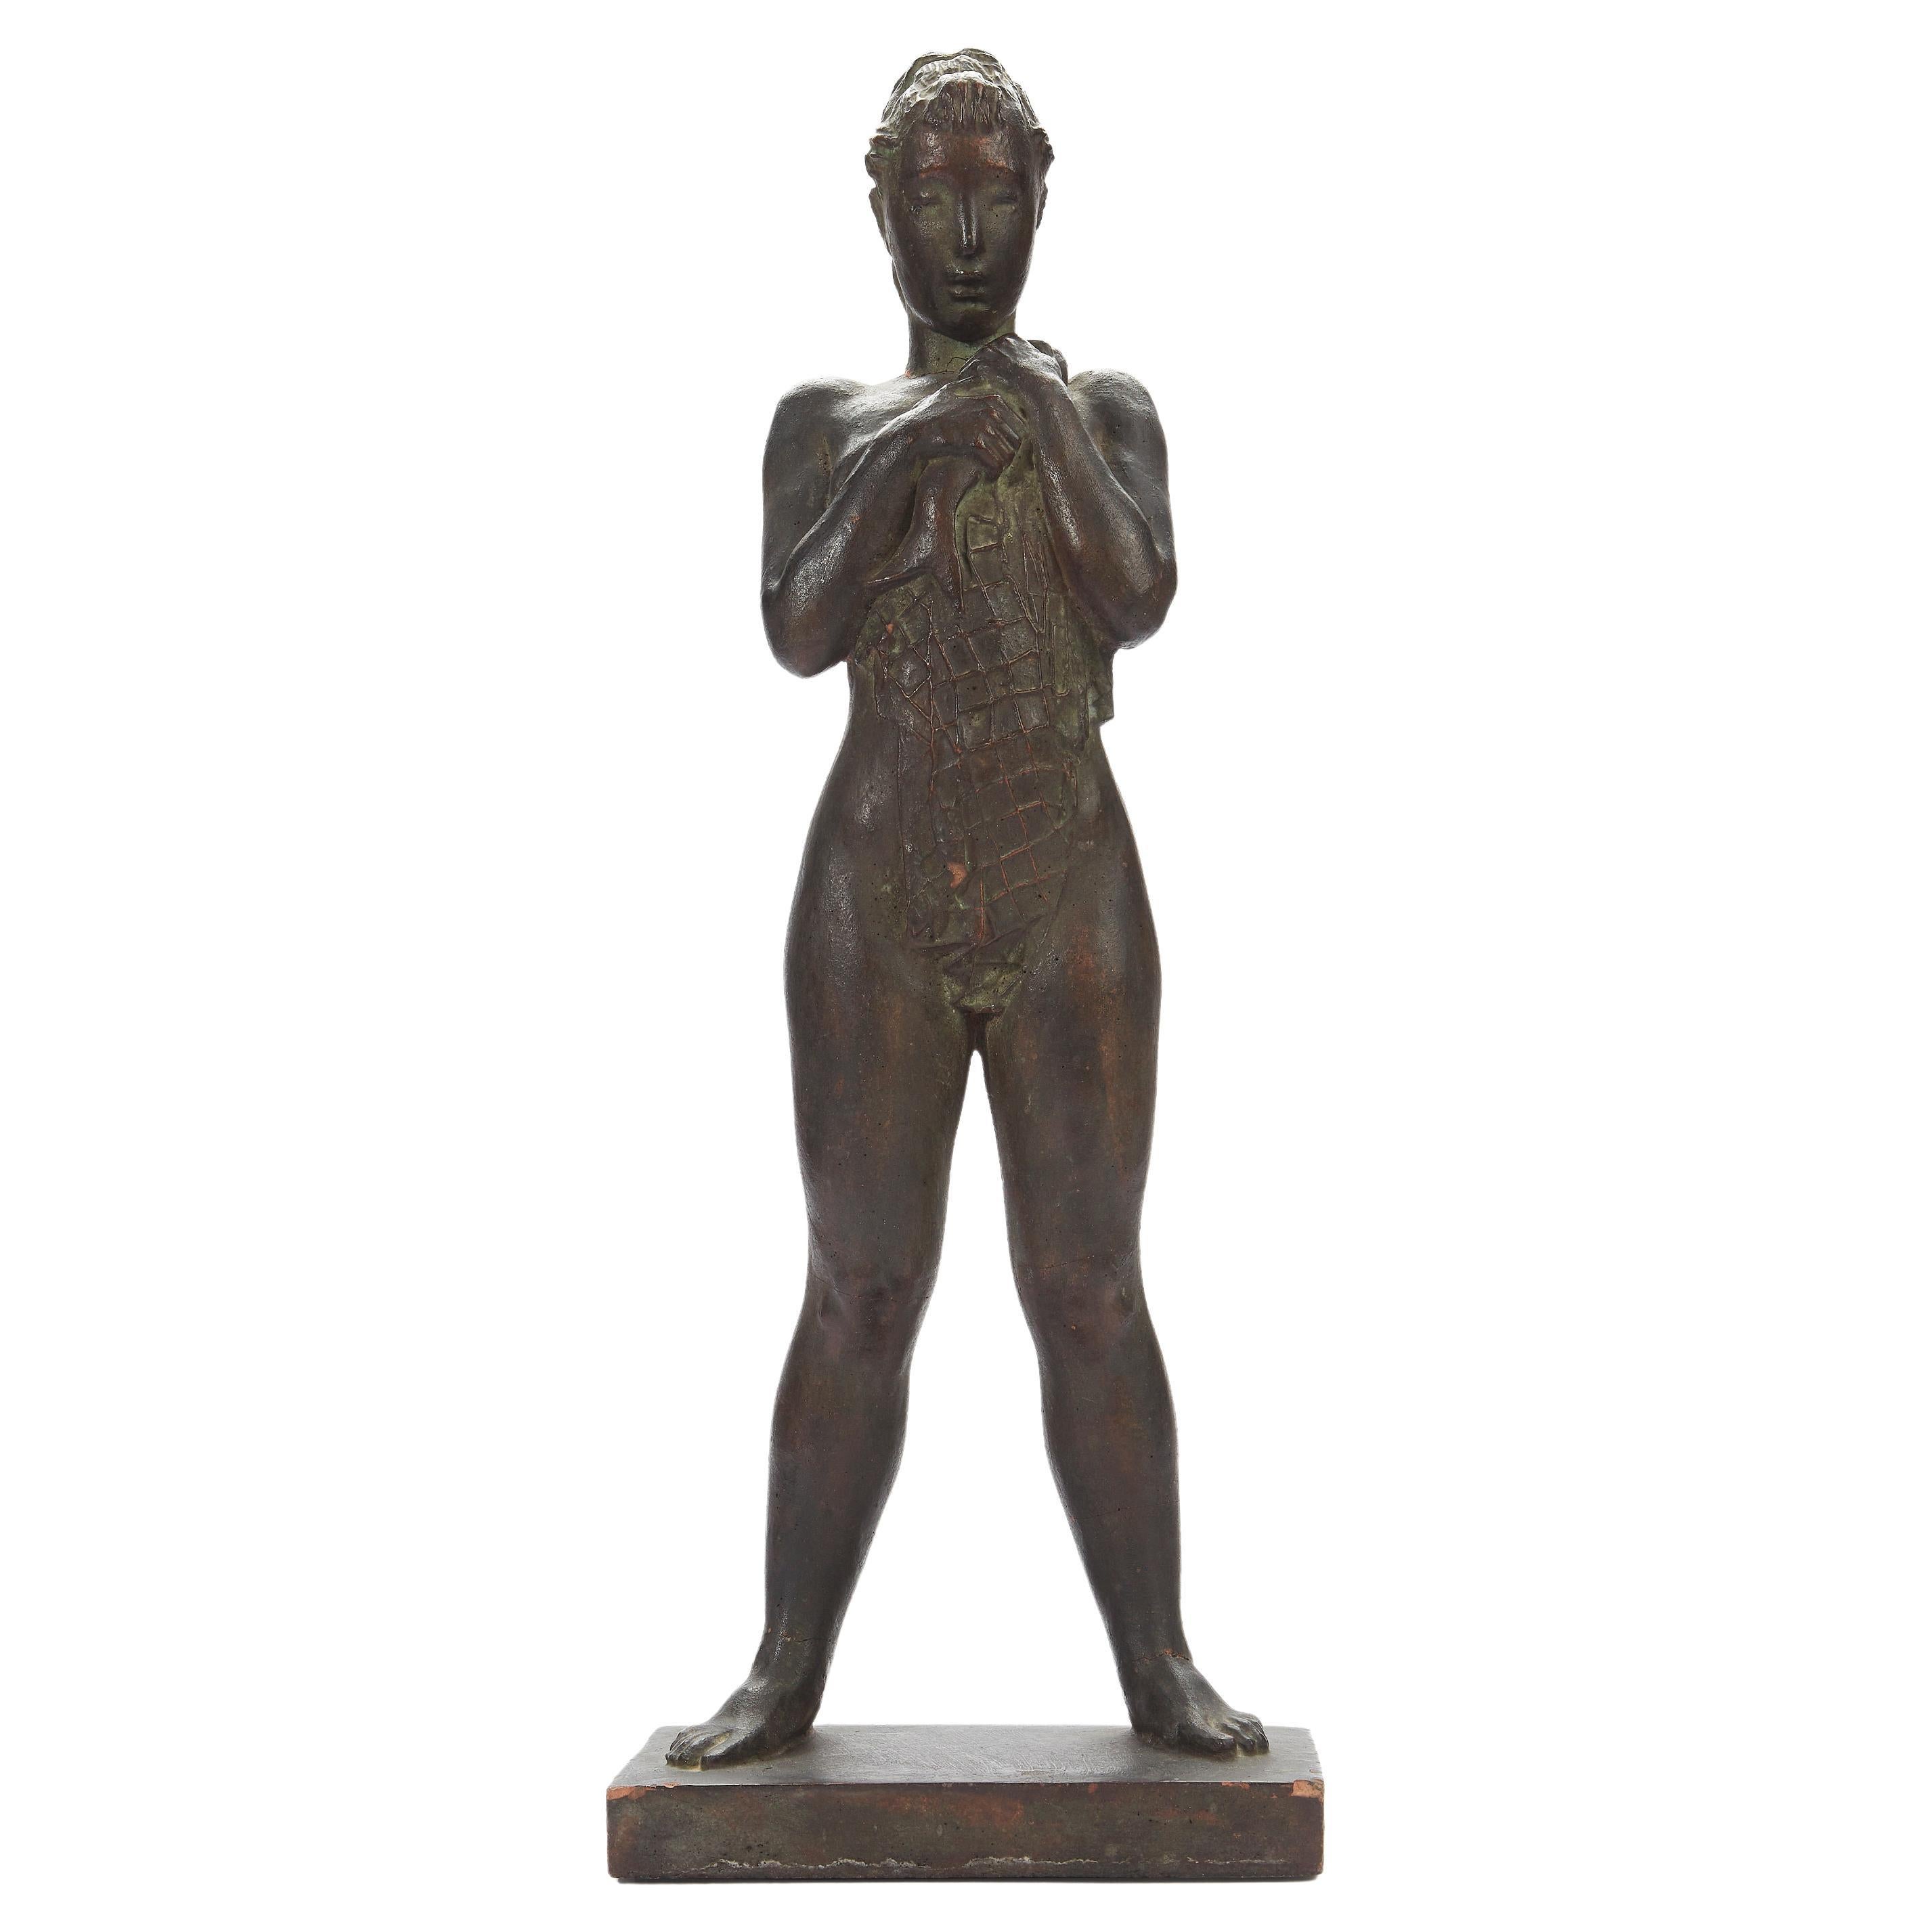 20th Century Italian naked girl figure with fish and net a bolognese terracotta sculpture with a dark bronze patina, dating back to 1940s by Enzo Pasqualini (Bologna, 1916-1998).

The Bolognese author was director of the Academy of Fine Arts in